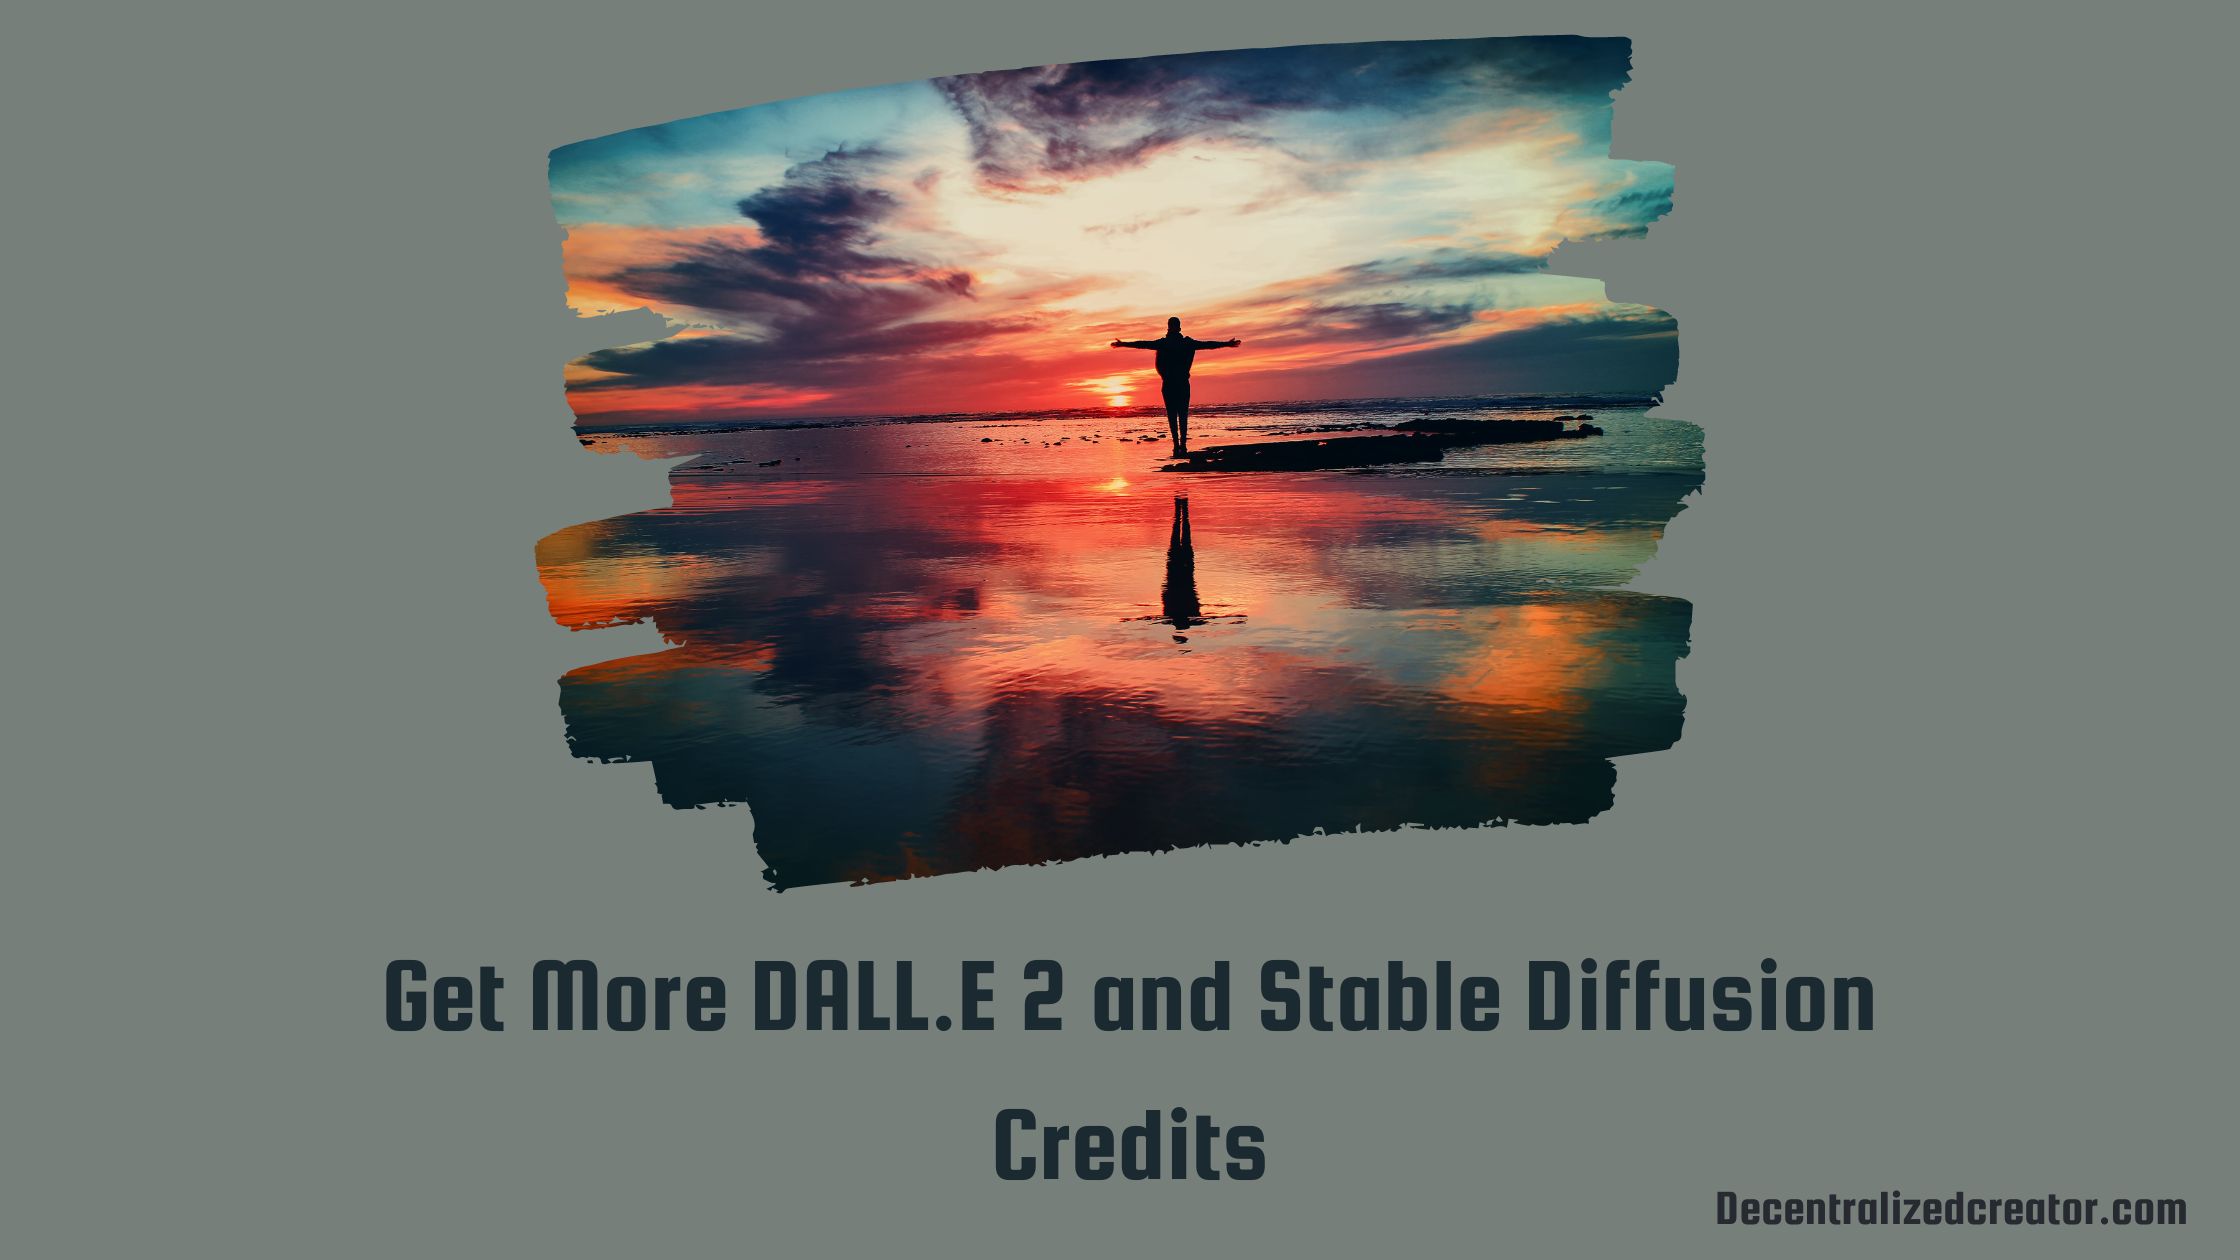 How to Get More DALL.E 2 and Stable Diffusion Credits